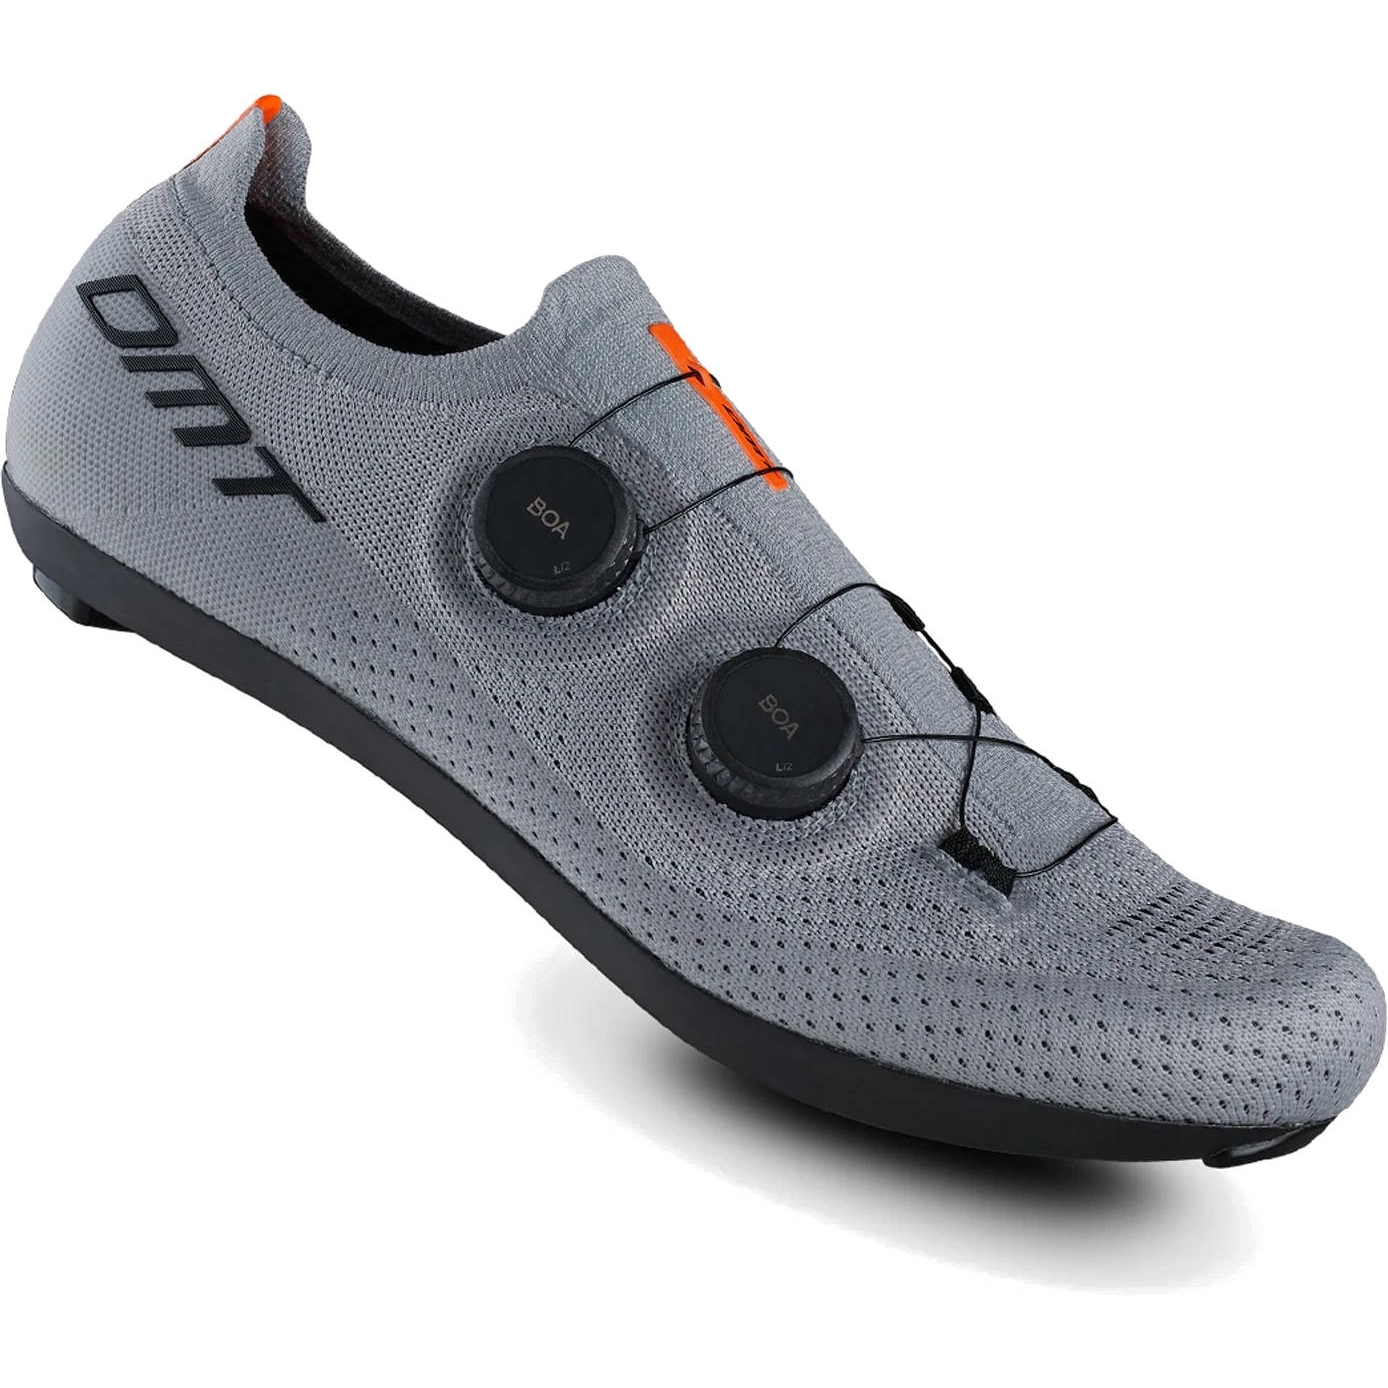 Picture of DMT KR0 Road Shoes - grey/grey